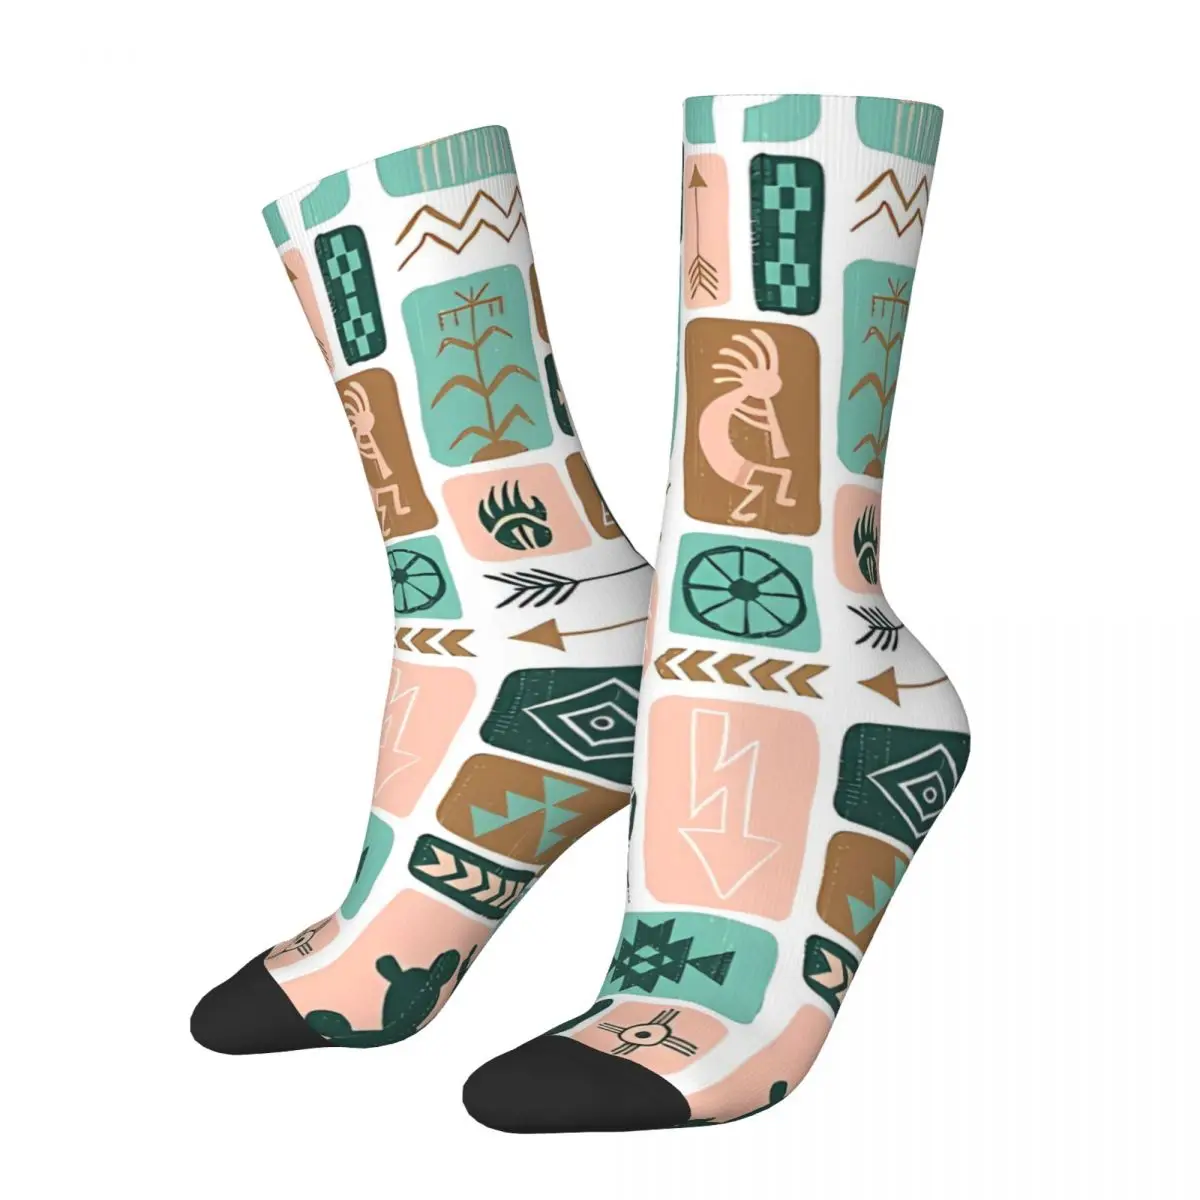 Funny Happy Sock for Men Southwest Dreams Teal Hip Hop Kokopelli Hopi Quality Pattern Printed Crew Sock Casual Gift